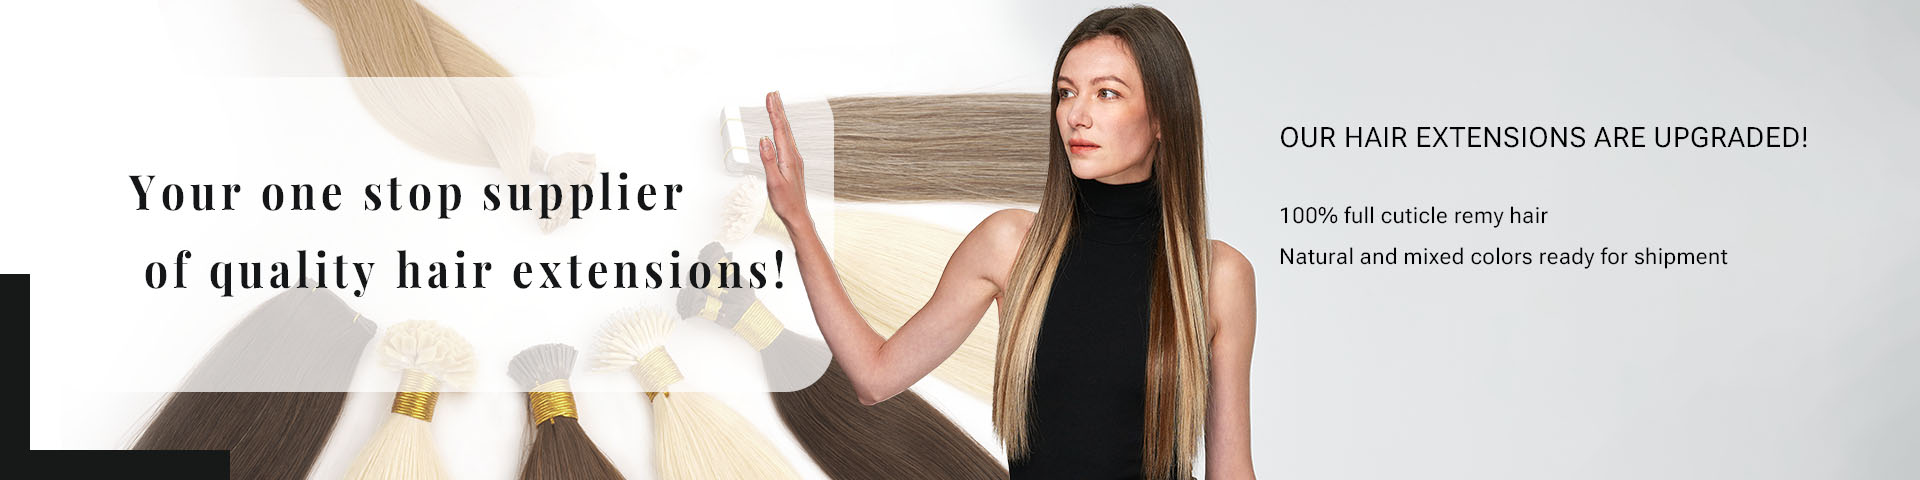 A woman with long, silky hair gesturing towards some human hair extensions in different colors.